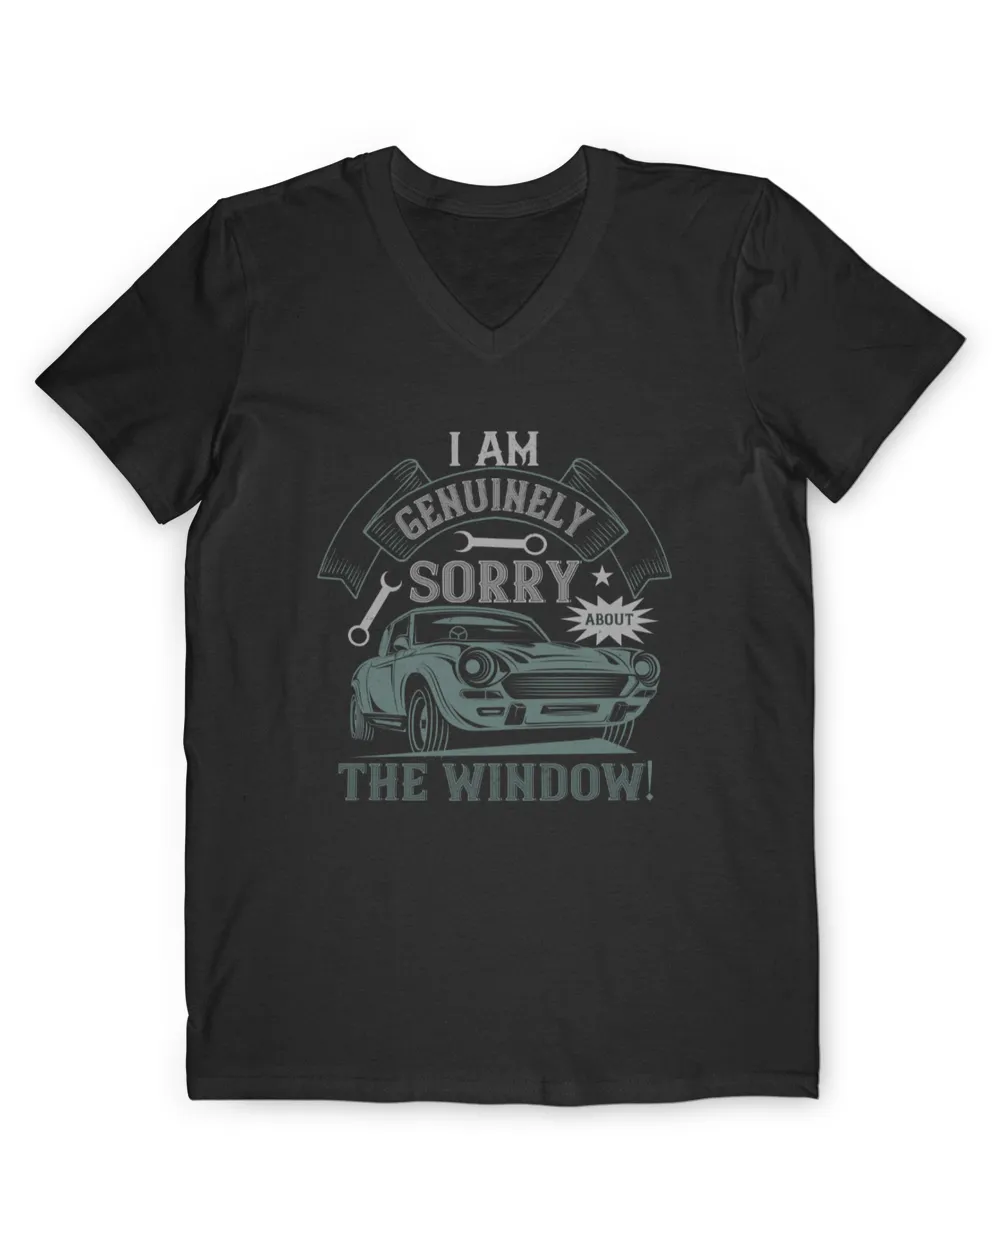 I Am Genuinely Sorry About The Window Hot Rod T-Shirt